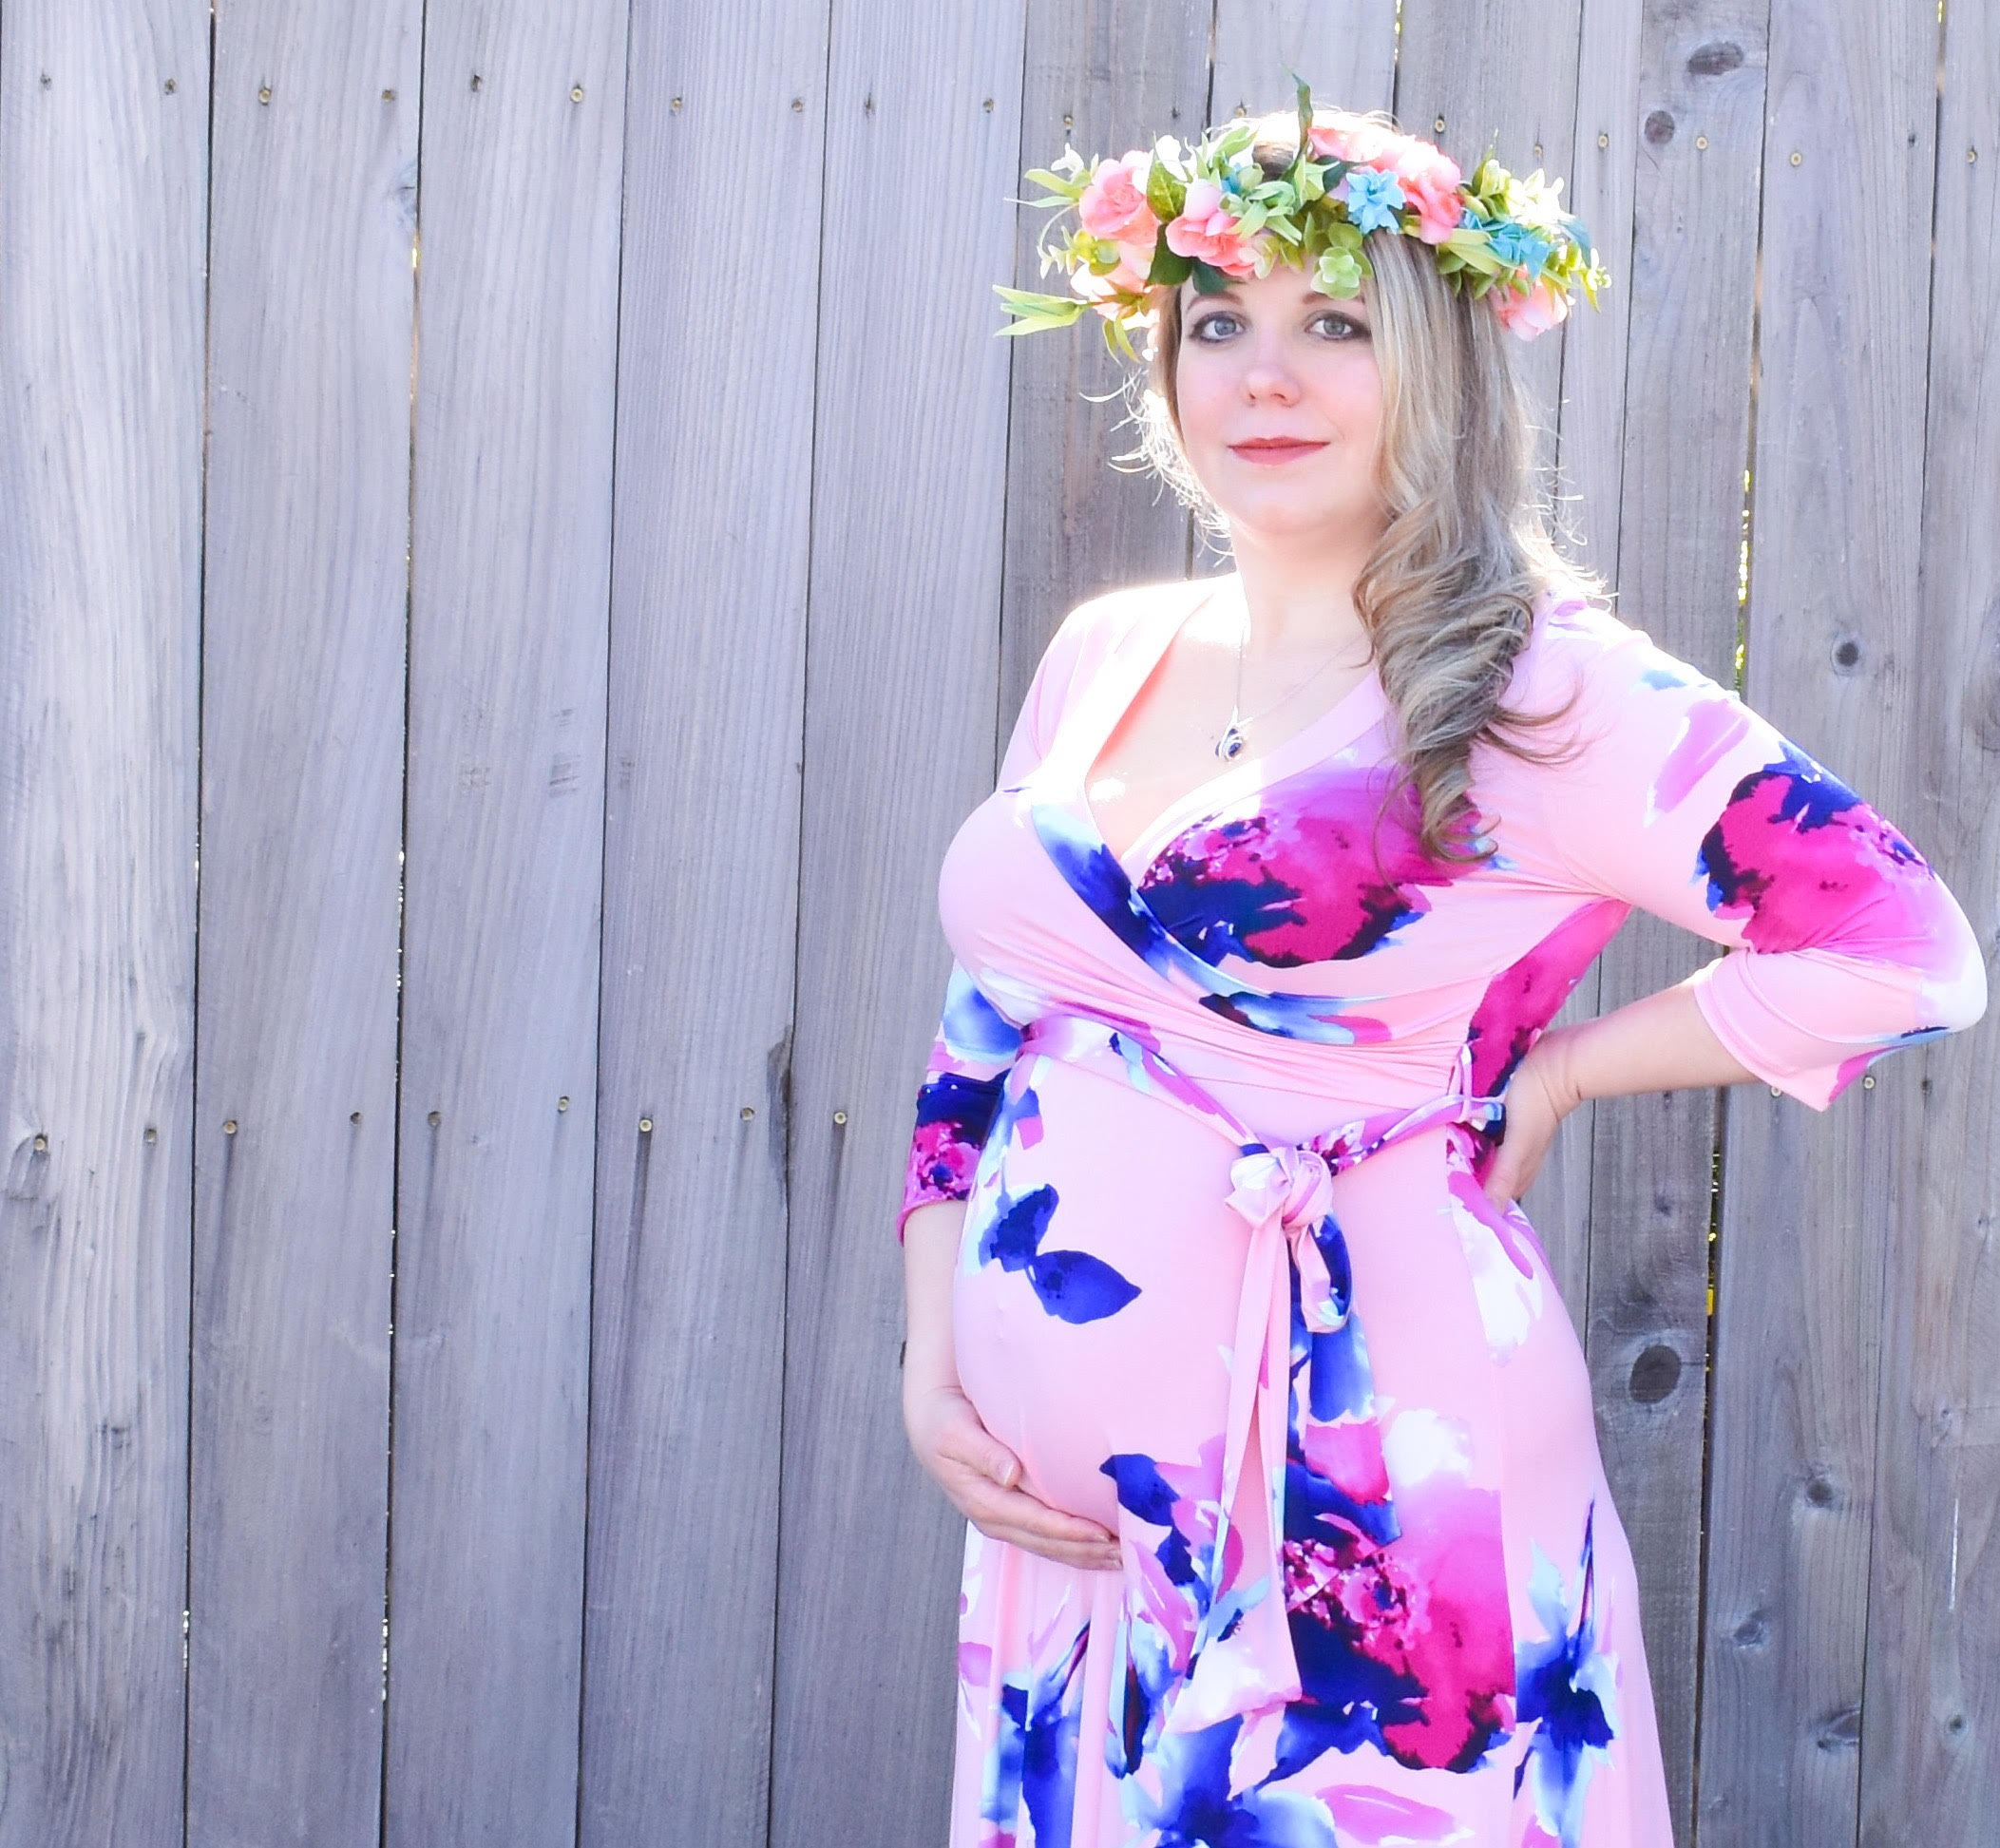 Pinkblush maternity clothing- Duties to Canada